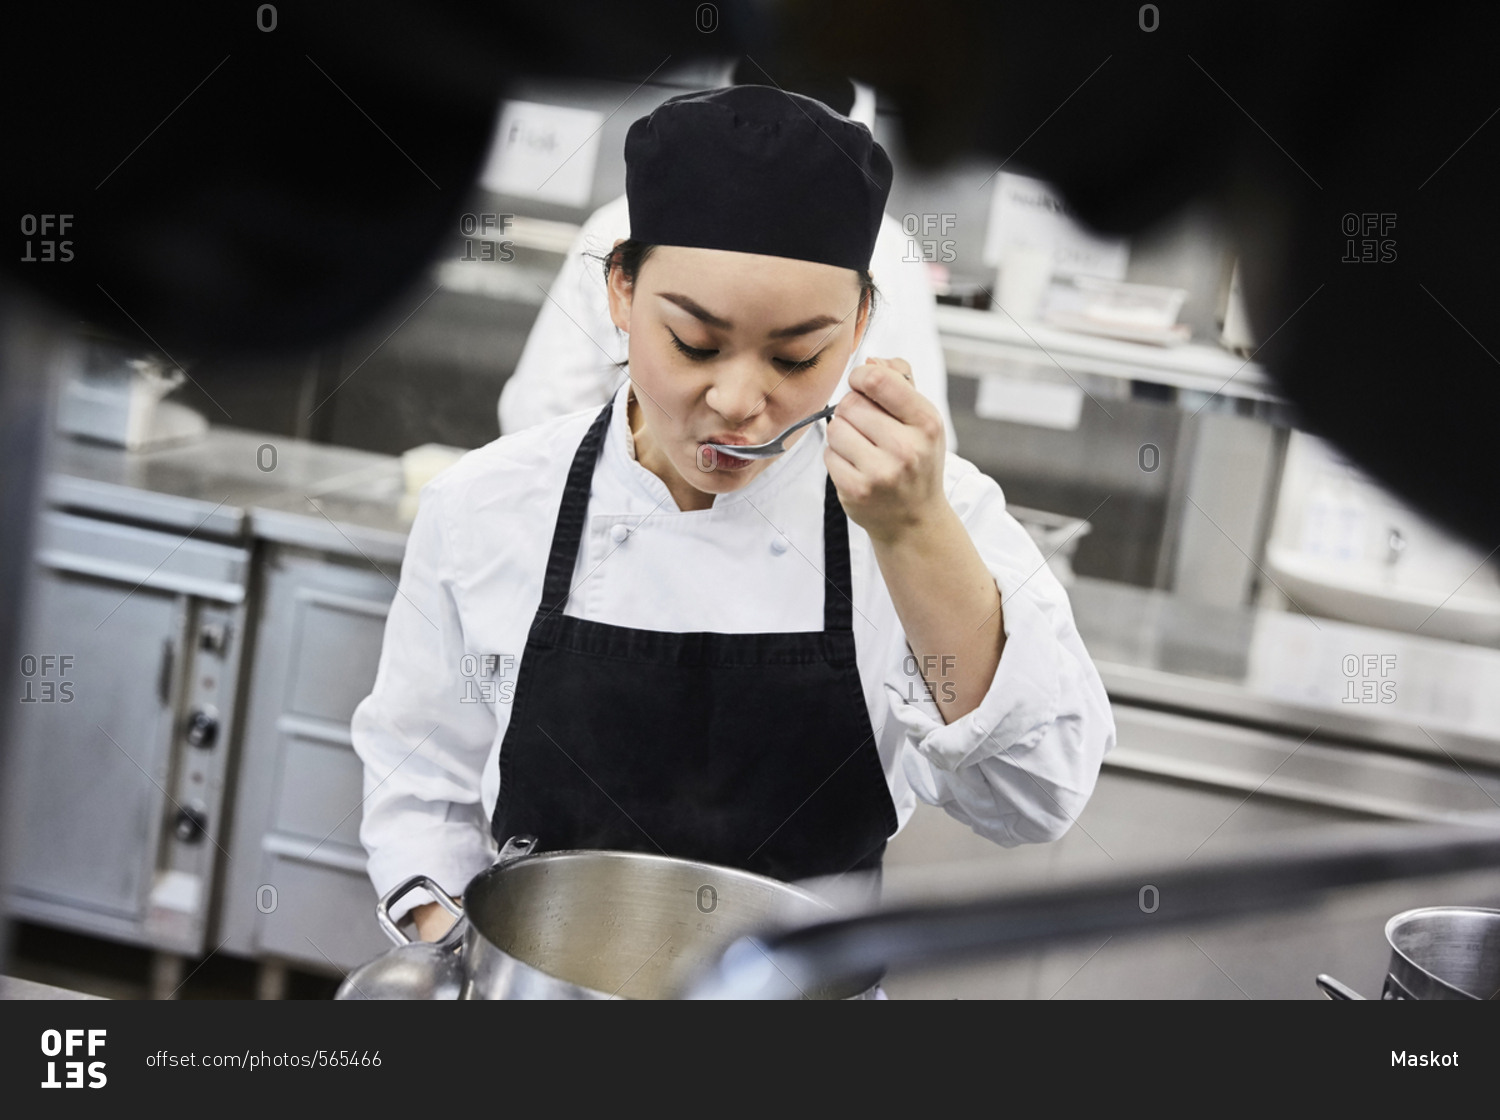 Female chef tasting food from cooking pan at commercial kitchen